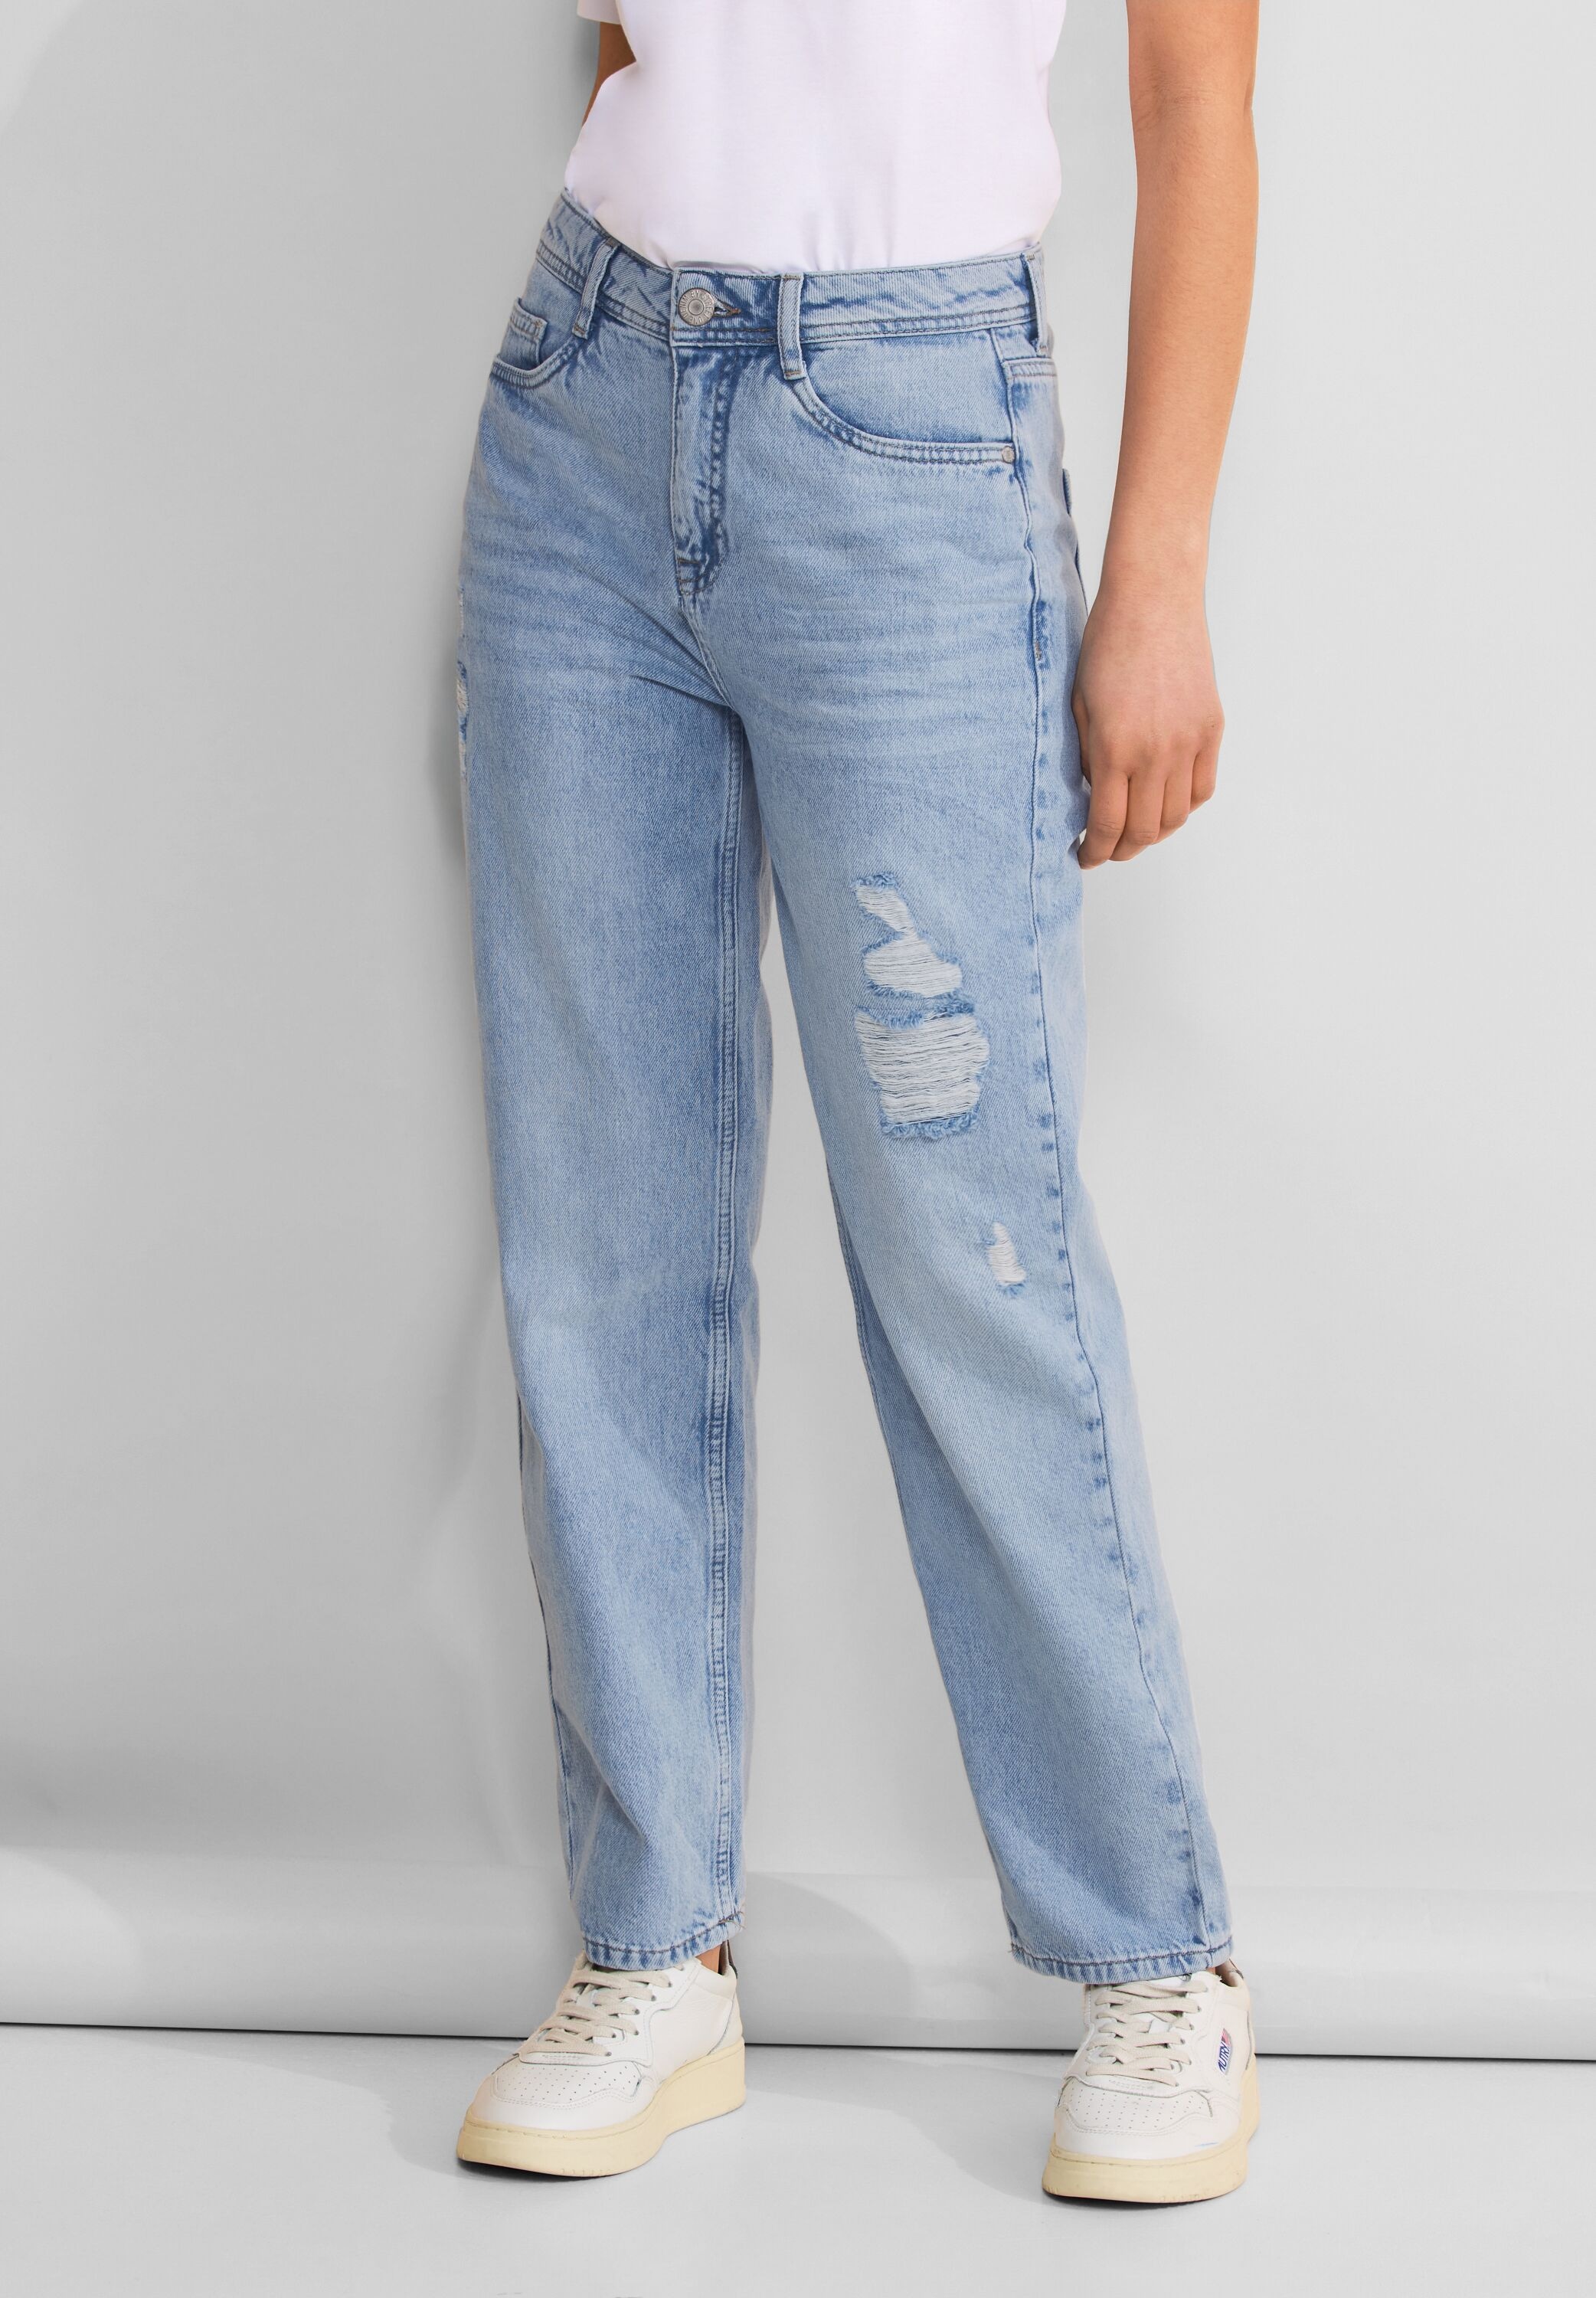 STREET ONE Straight-Jeans, mit Löcher-Used-Look-Street One 1